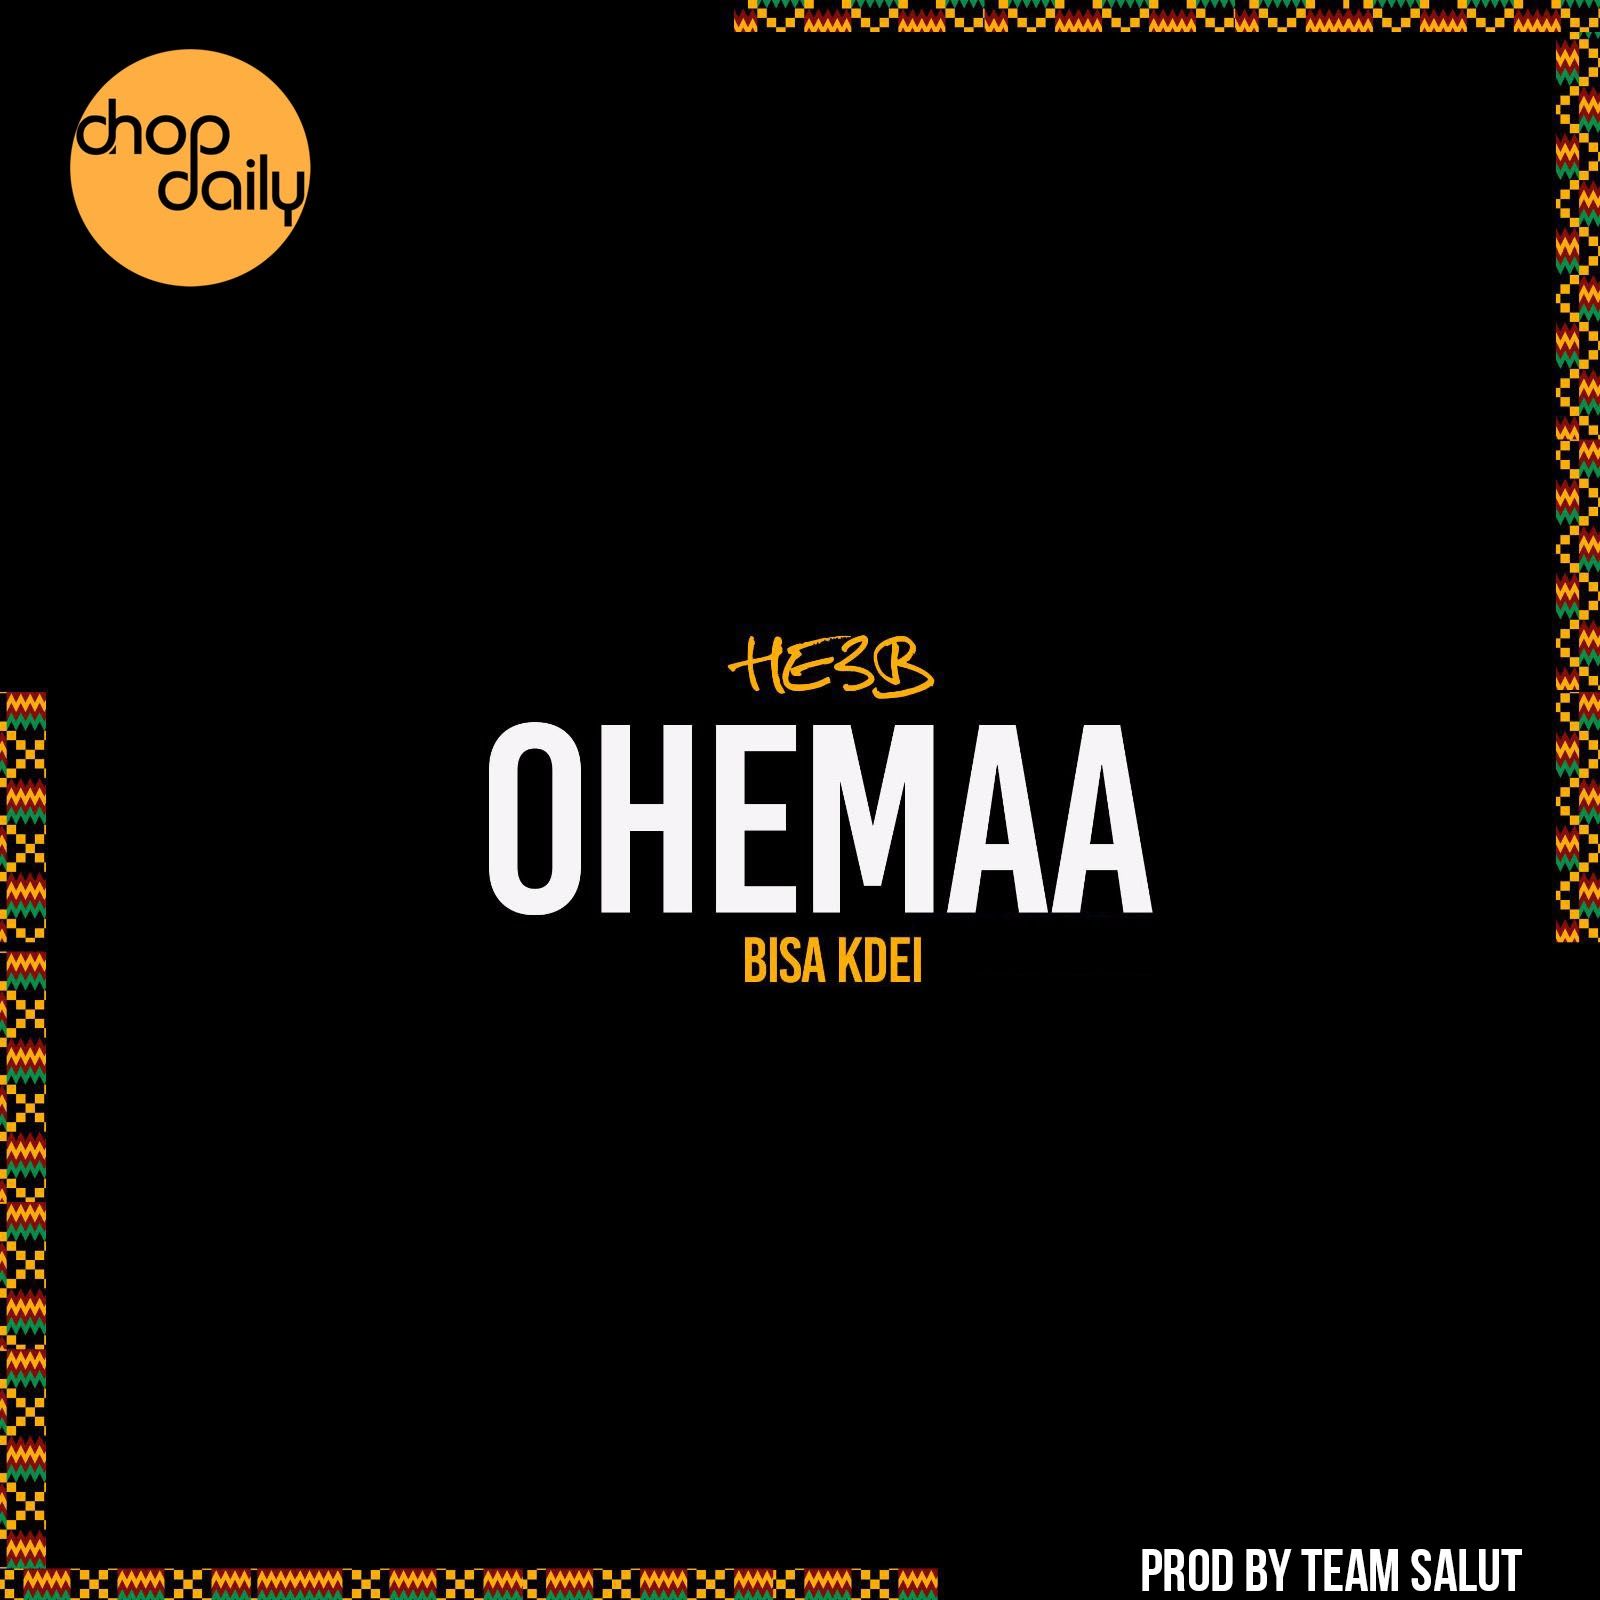 Chop Daily - Ohemaa Ft. HE3B, Bisa Kdei